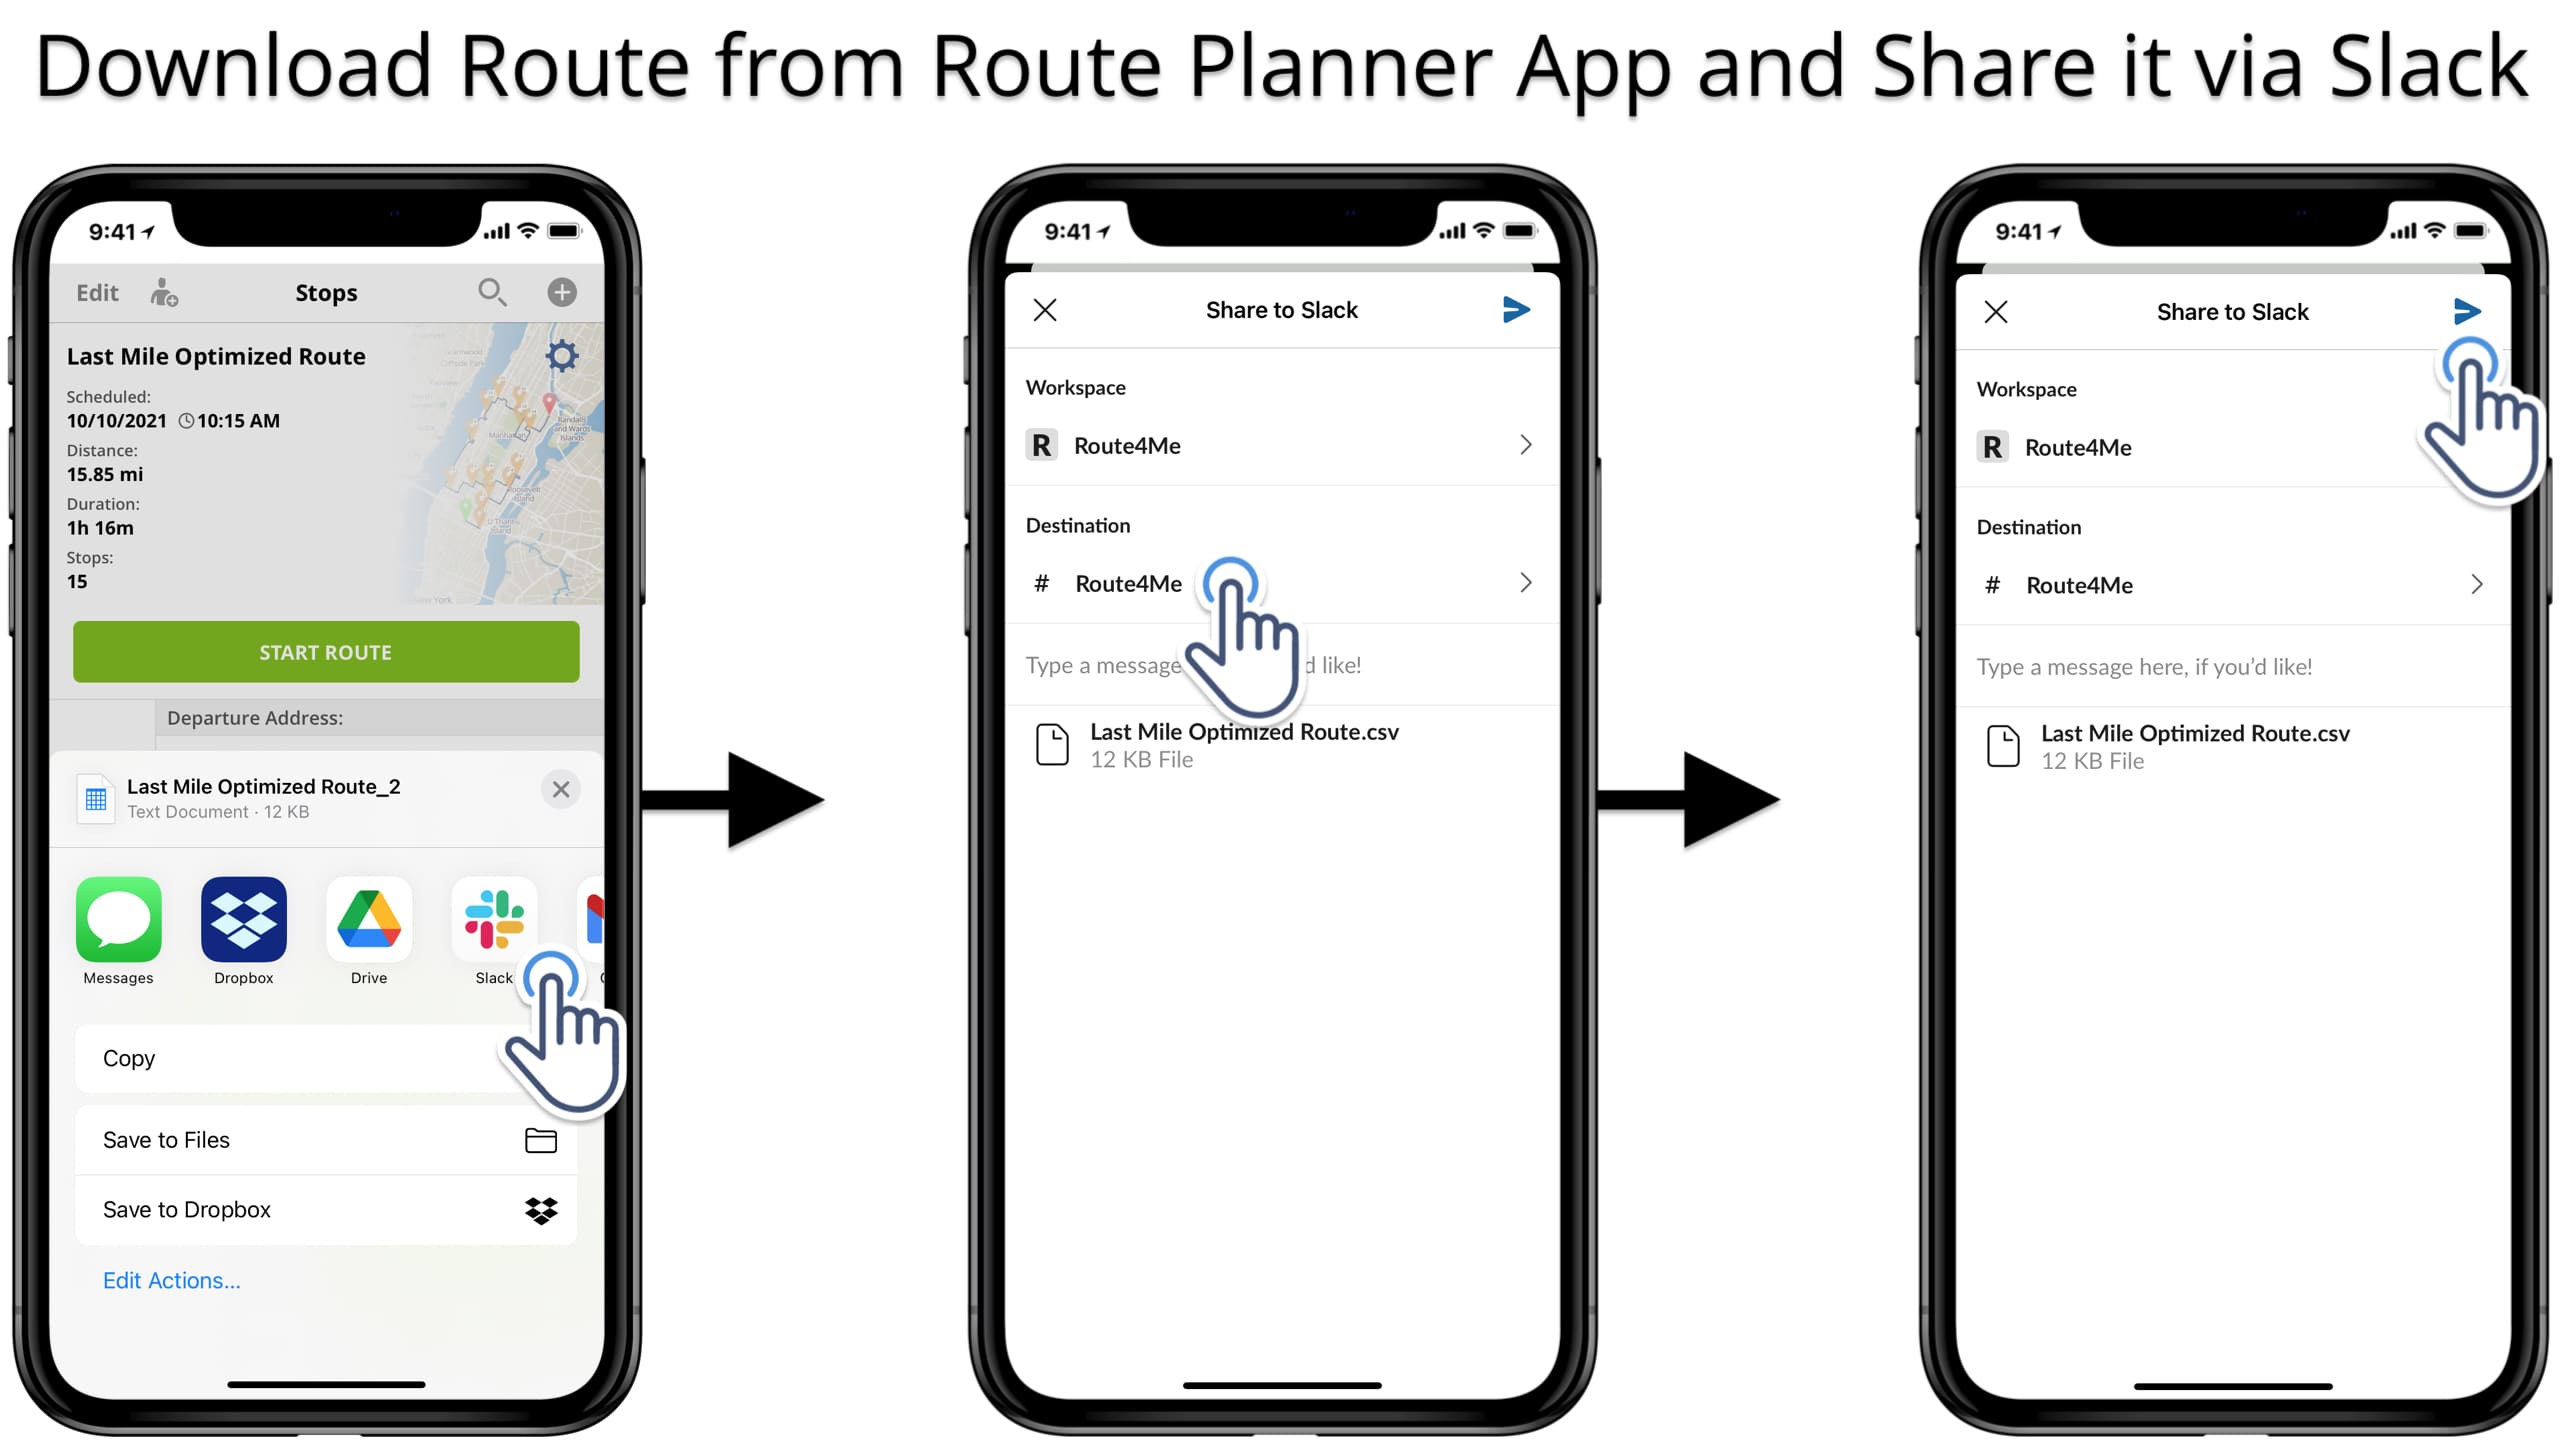 Send route CSV files from iPad and iPhone route planner app to Slack workspace.